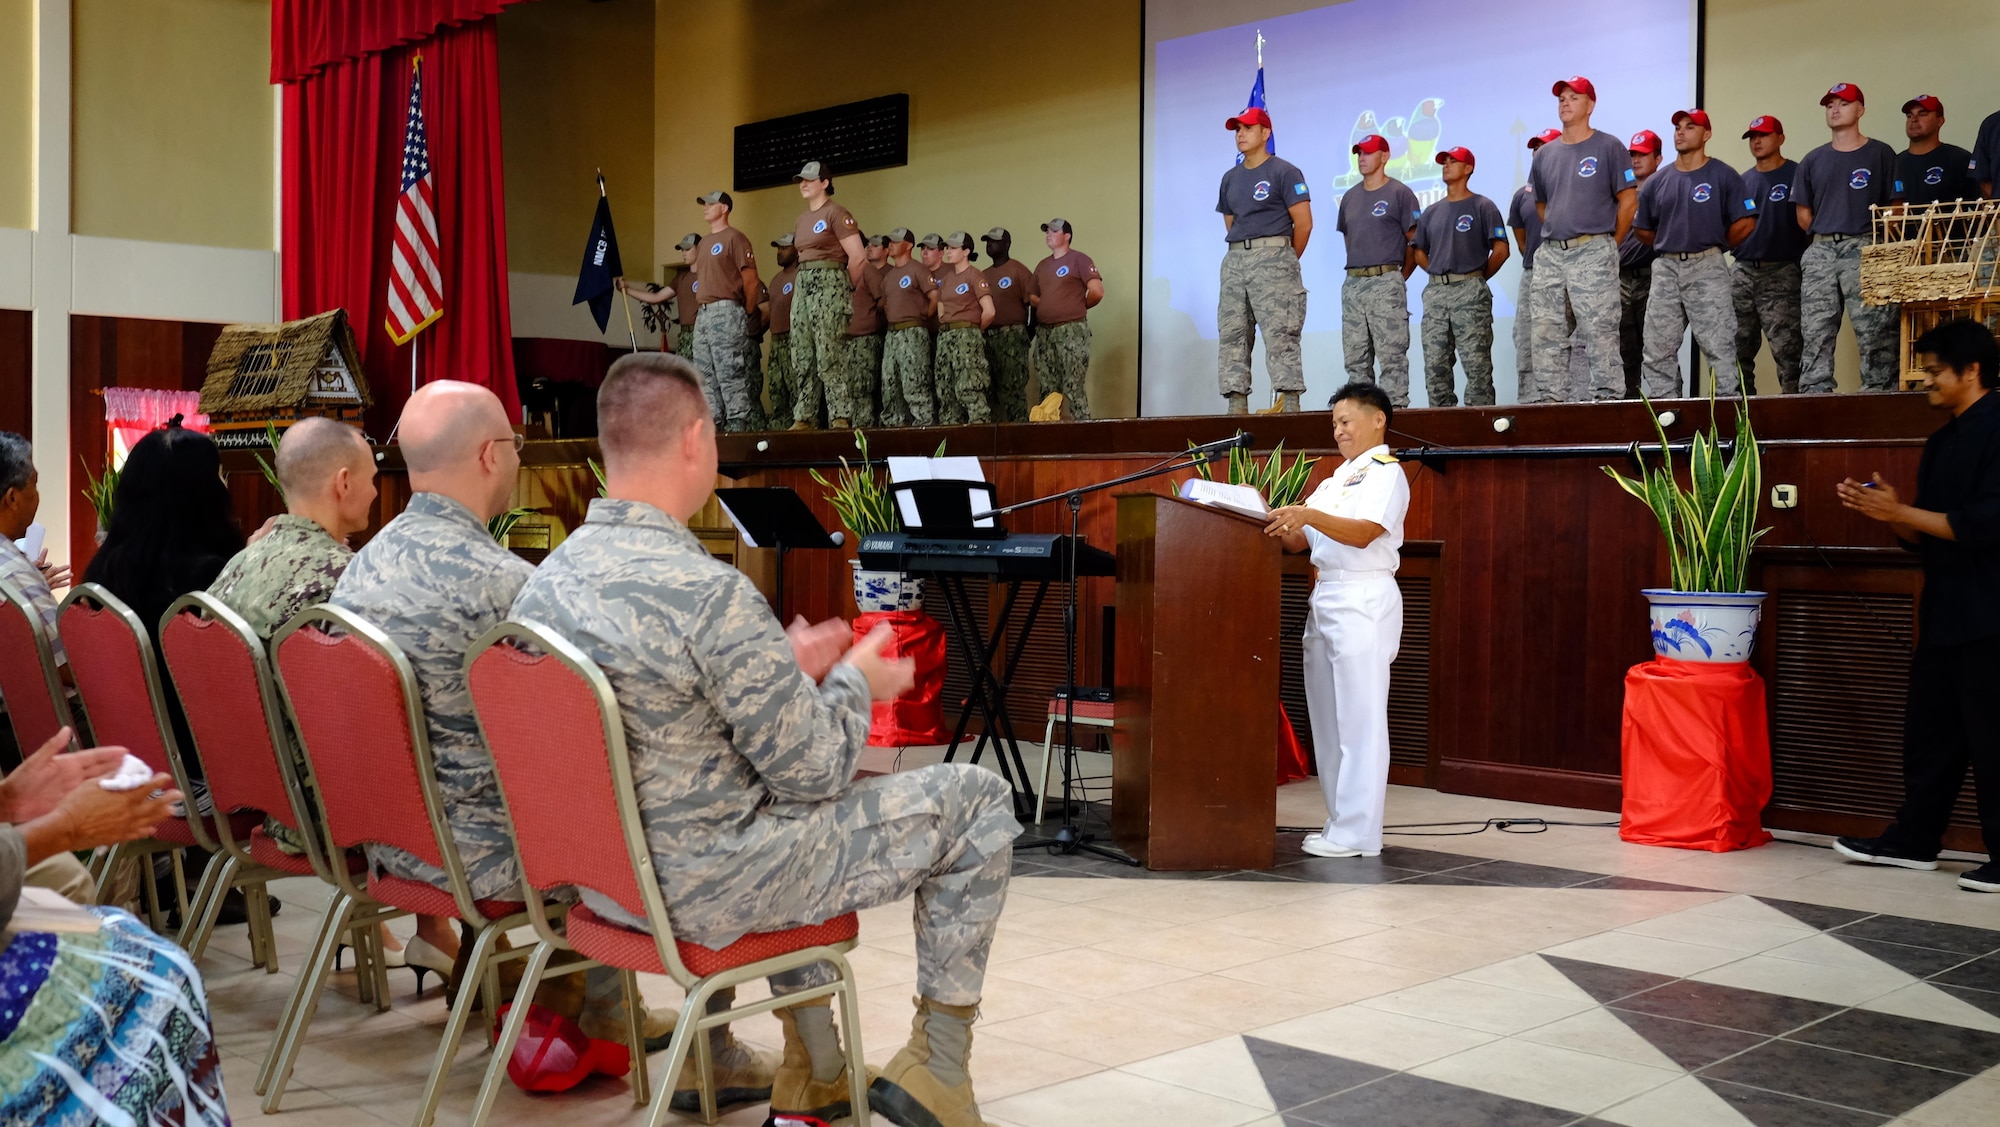 U.S. Navy Rear Adm. Bette Bolivar, Joint Region Marianas commander, speaks during a change of charge ceremony, held Feb. 19, 2016, at the Ngarachamayong Cultural Center, located in Palau’s Koror state. Airmen of CAT 554-01 provided construction capabilities, apprenticeship training, medical outreach and community engagement opportunities while deployed to the Republic of Palau. (U.S. Air Force photo by Staff Sgt. Christopher Stoltz/Released)